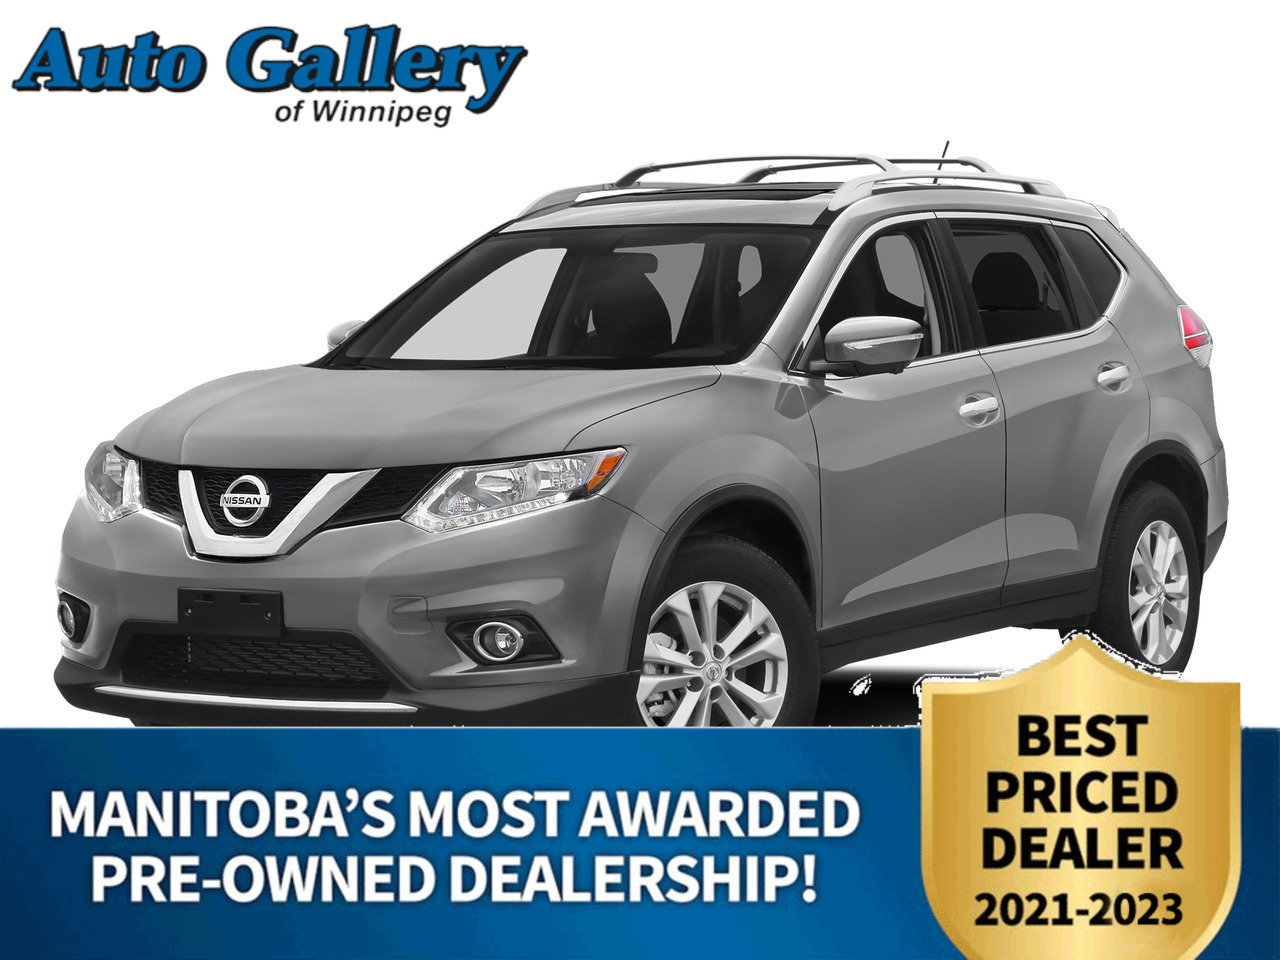 2015 Nissan Rogue SL, AWD, HEATED SEATS, SUNROOF, LEATHER, & MORE!